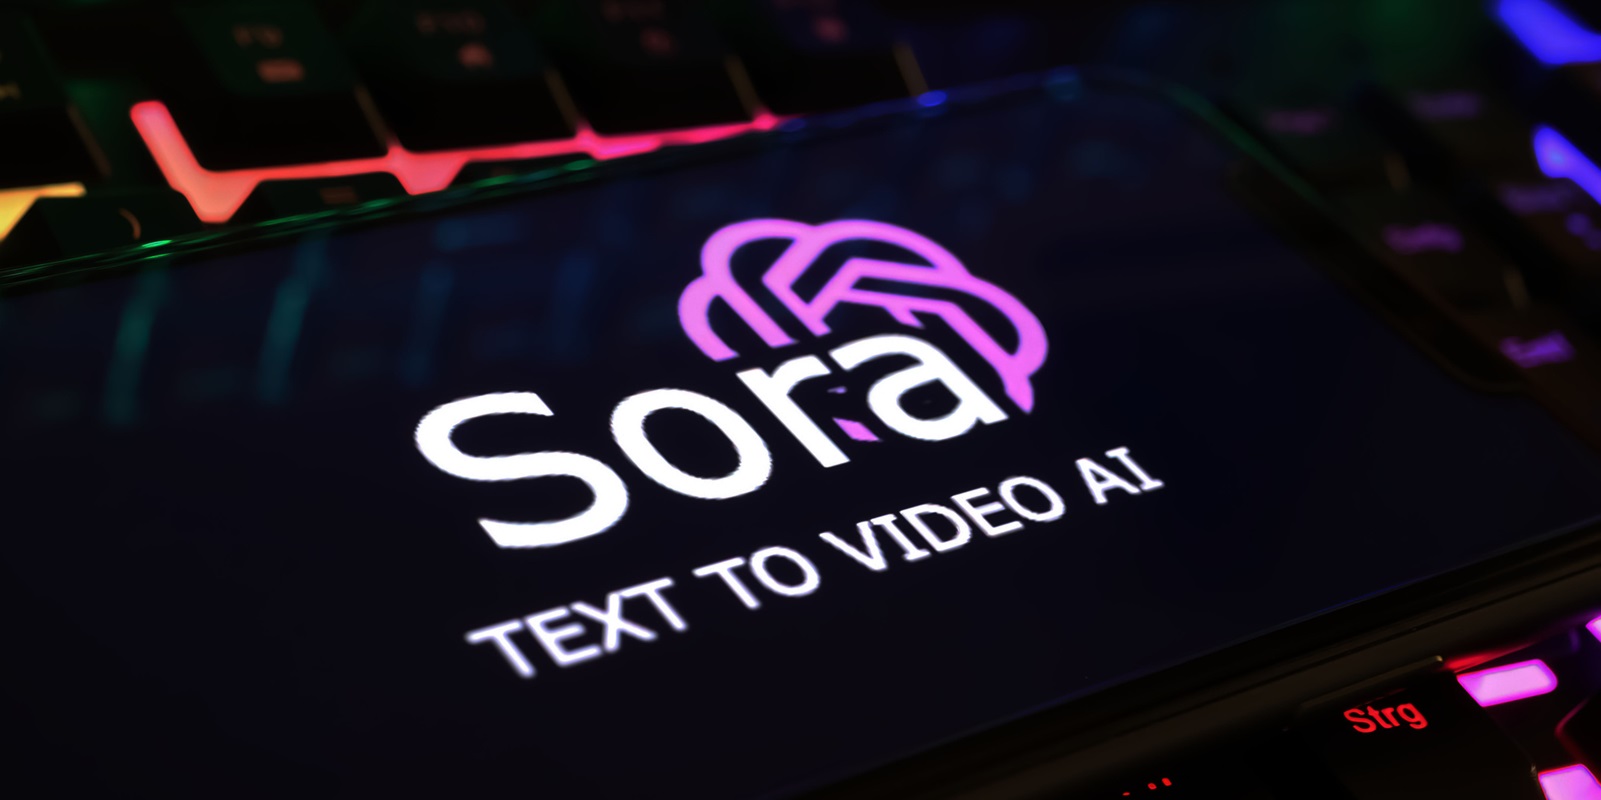 artificial intelligence - Sora video tool on mobile phone